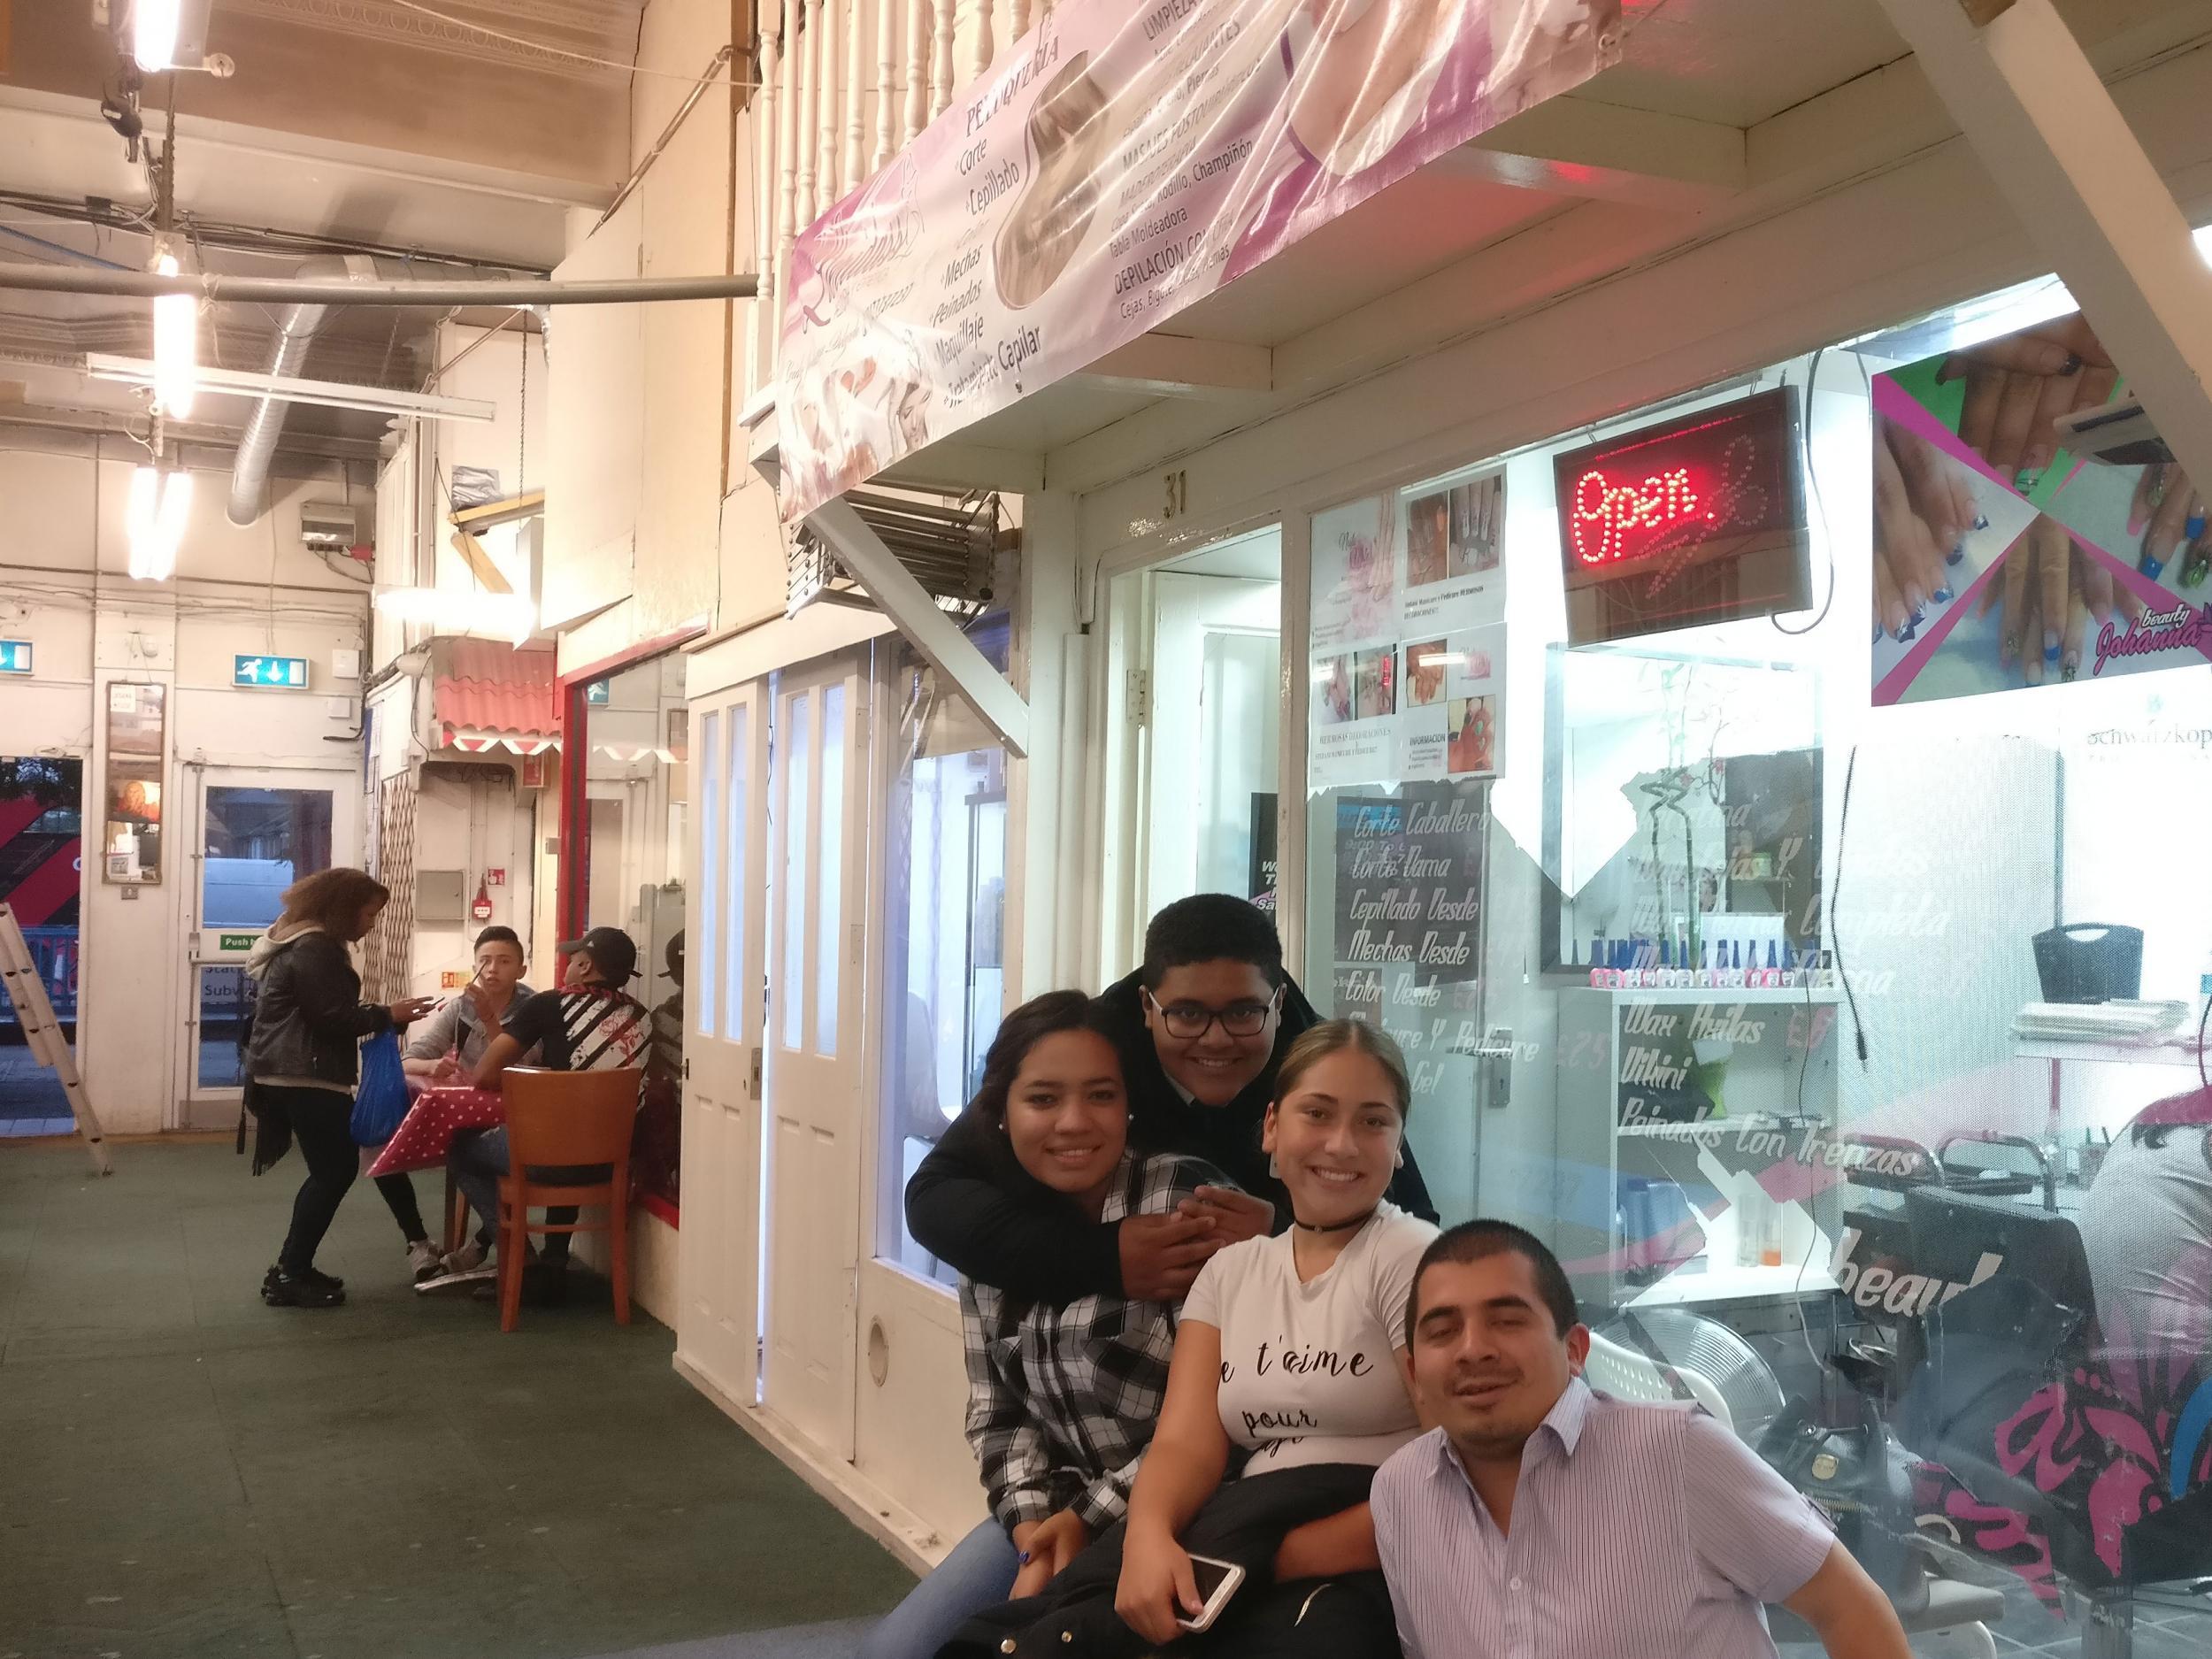 Christian Catano, 13, Dixy Catano, 21, Jessica Agudelo, 16 and Victor ‘Pacho‘ Martinez hang out in the market